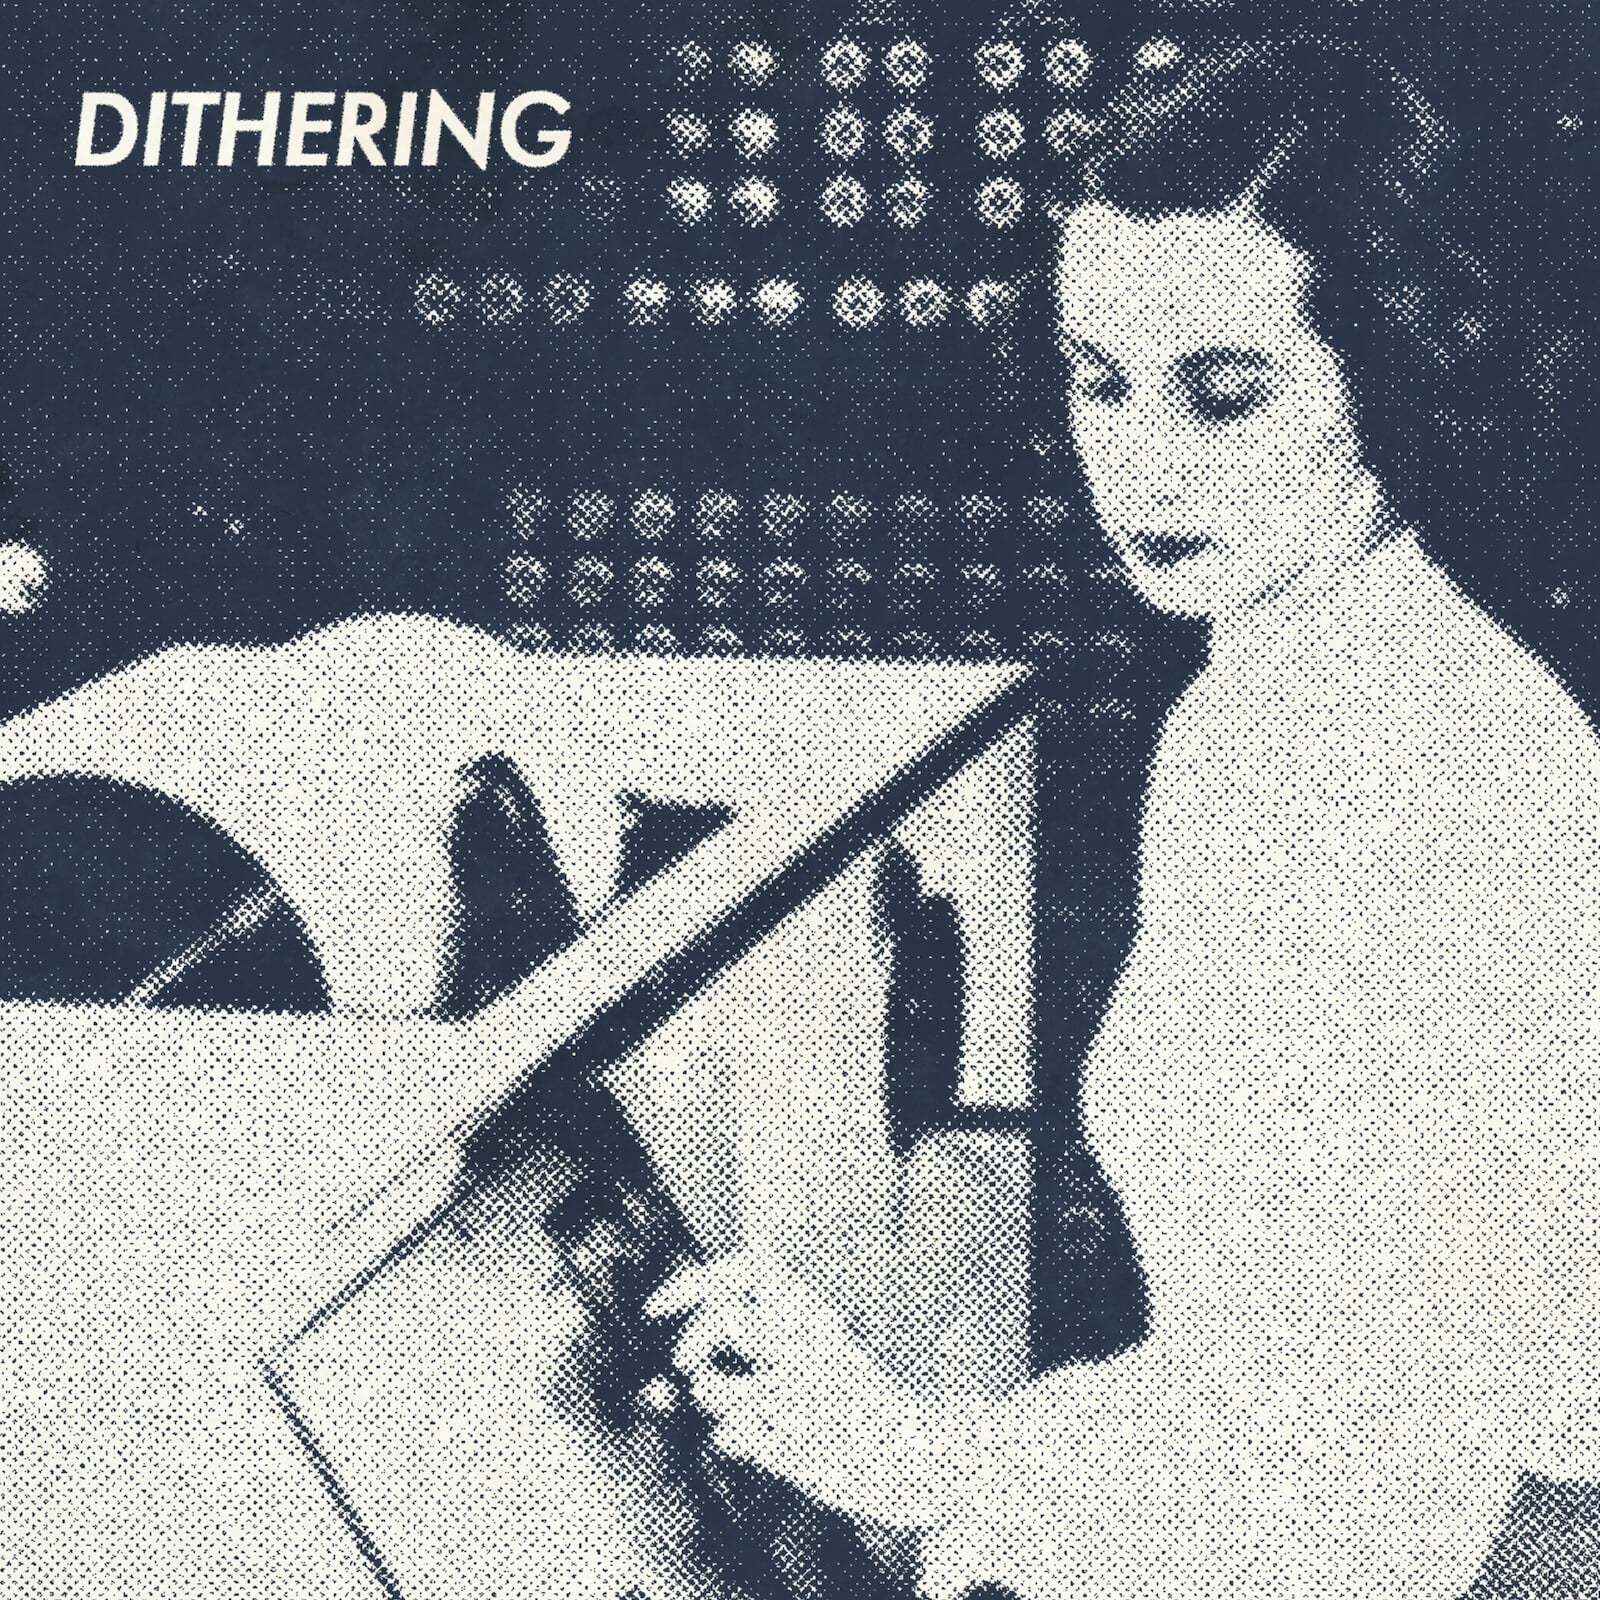 February 2023 cover art for Dithering, depicting a woman, circa the mid-20th century, at a large computer terminal/printer of some sort. She is quite dapperly put together.